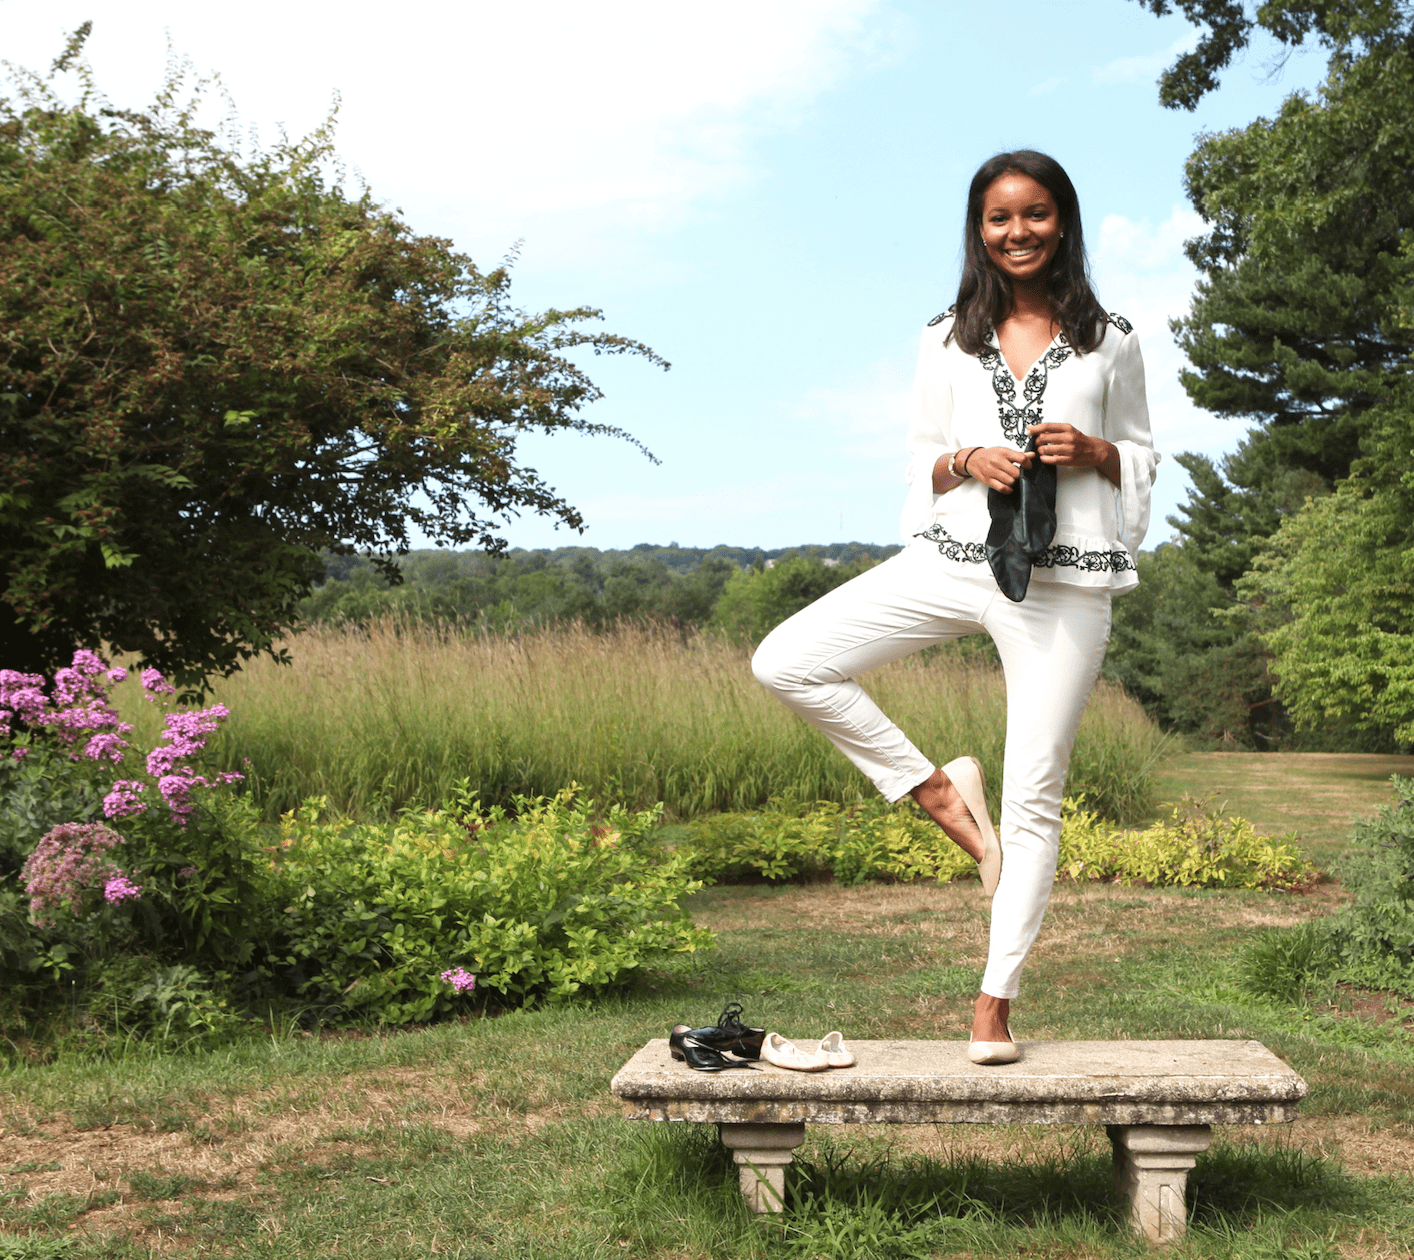 Annabella Correa-Maynard, recent graduate of Hall High School, is one of West Hartford Magazine’s ‘Terrific Teens’ for 2016. Photographed at West Hartford’s Westmoor Park. Photo credit: Todd Fairchild